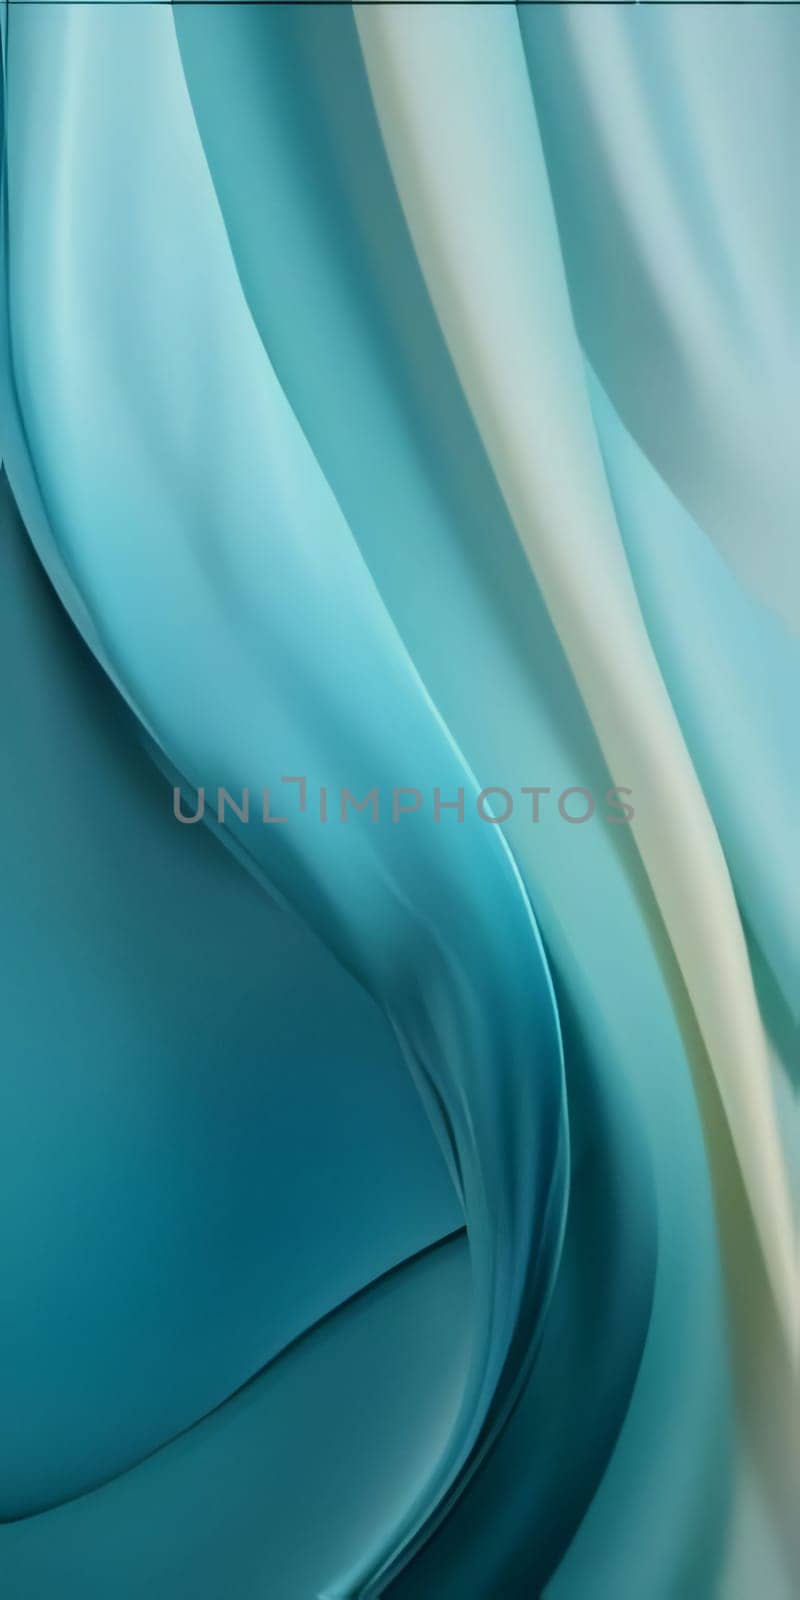 Abstract background design: abstract background of blue silk or satin with some smooth lines in it